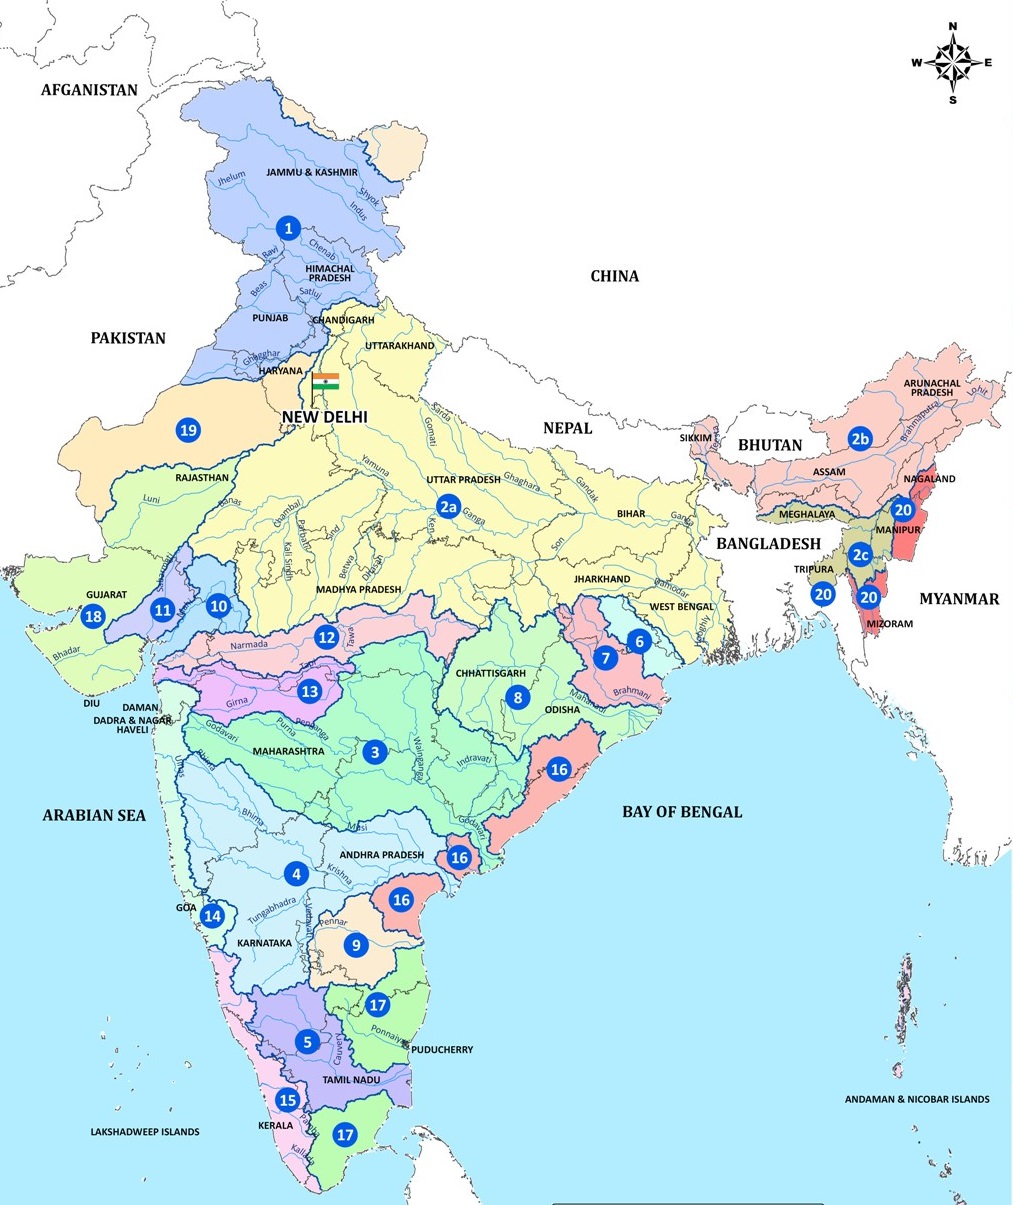 indian river system map pdf download Classification Of Drainage Systems Of India Pmf Ias indian river system map pdf download